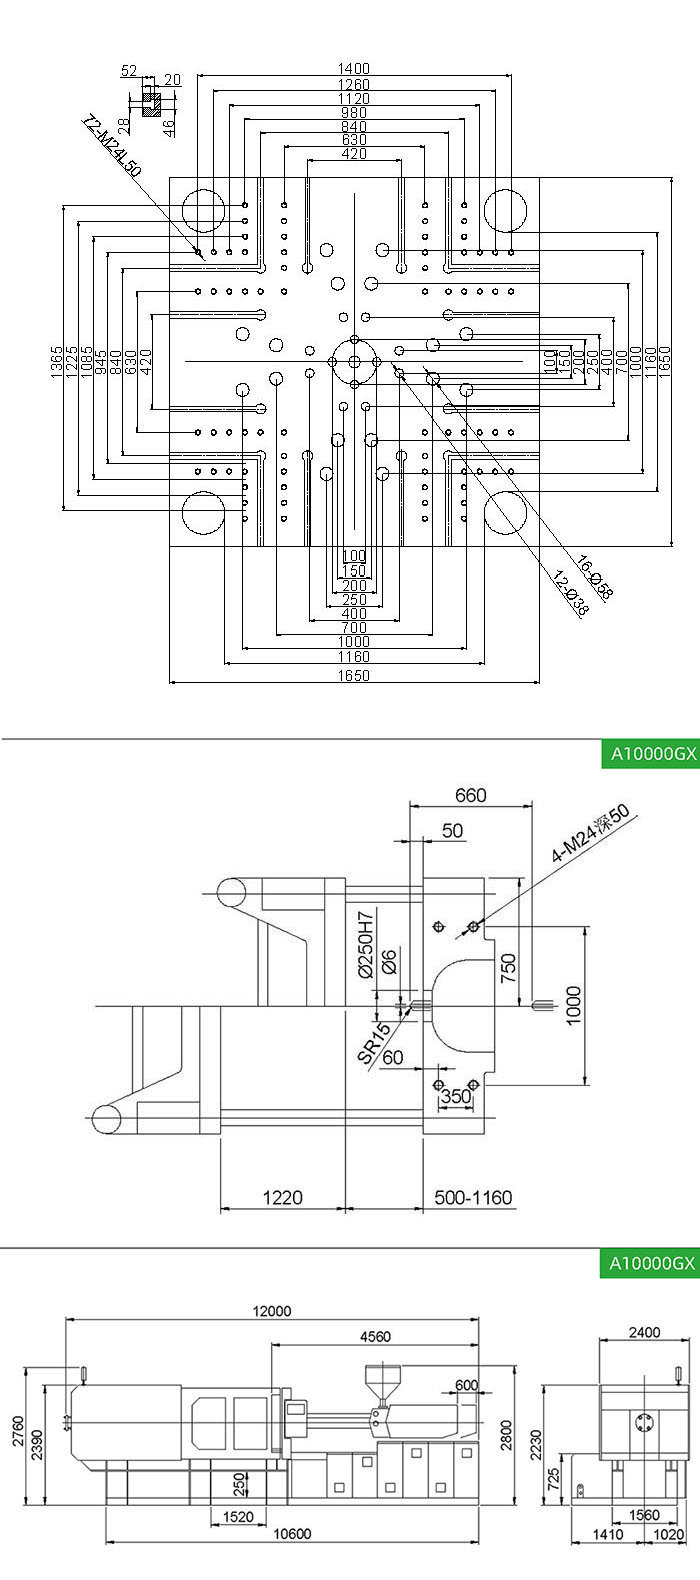 Specification Drawings of 1000 ton Injection Molding Machine